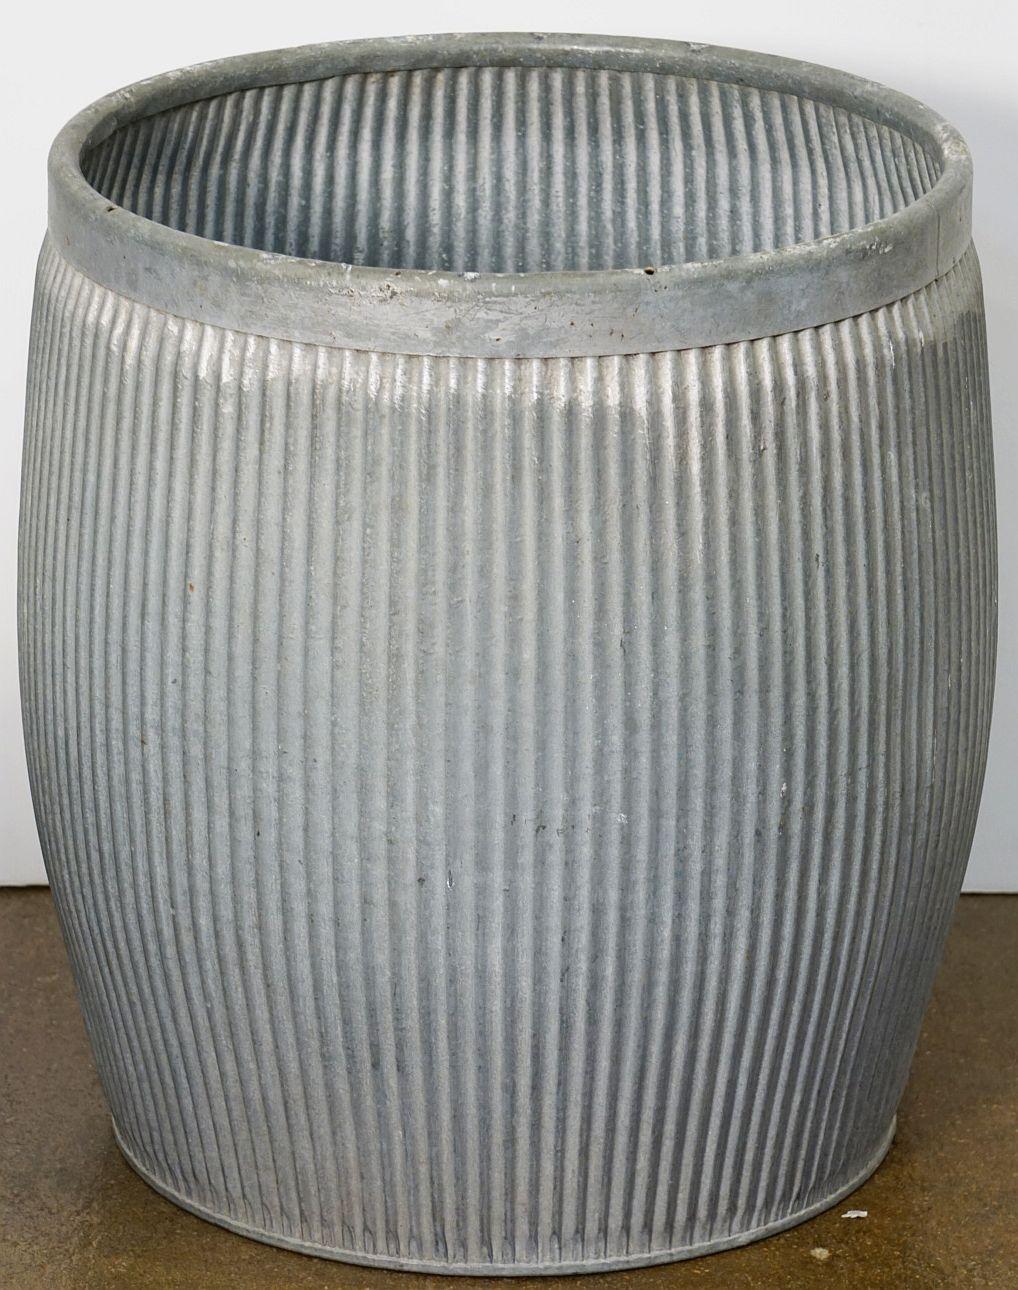 A fine medium-sized English garden pot or dolly tub planter of zinc, featuring a ribbed design to the circumference, with rolled edge top and base.

 (Height 20 in x Diameter 20 in)

Can be turned upside down for use as a table.

Perfect for a